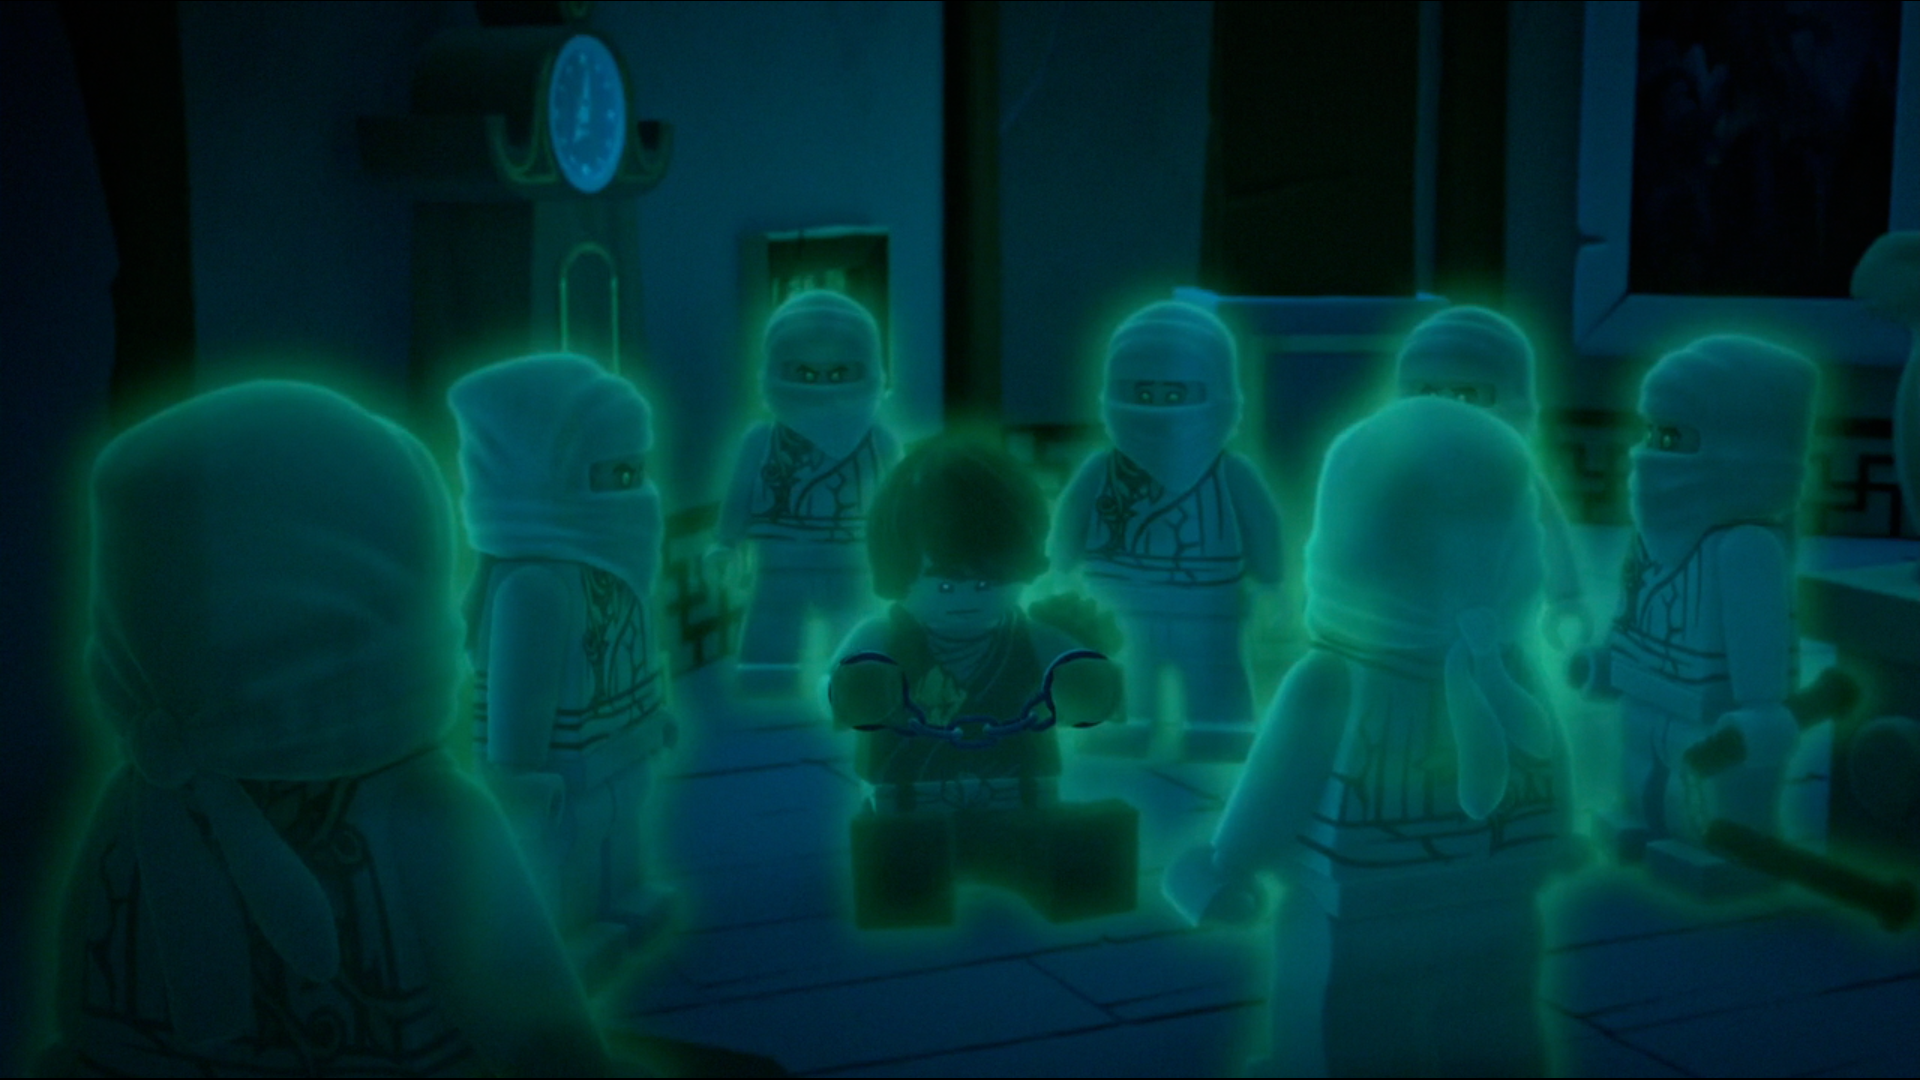 https://static.wikia.nocookie.net/ninjago/images/3/3c/DoDColePrisoned.png/revision/latest?cb=20161110040840